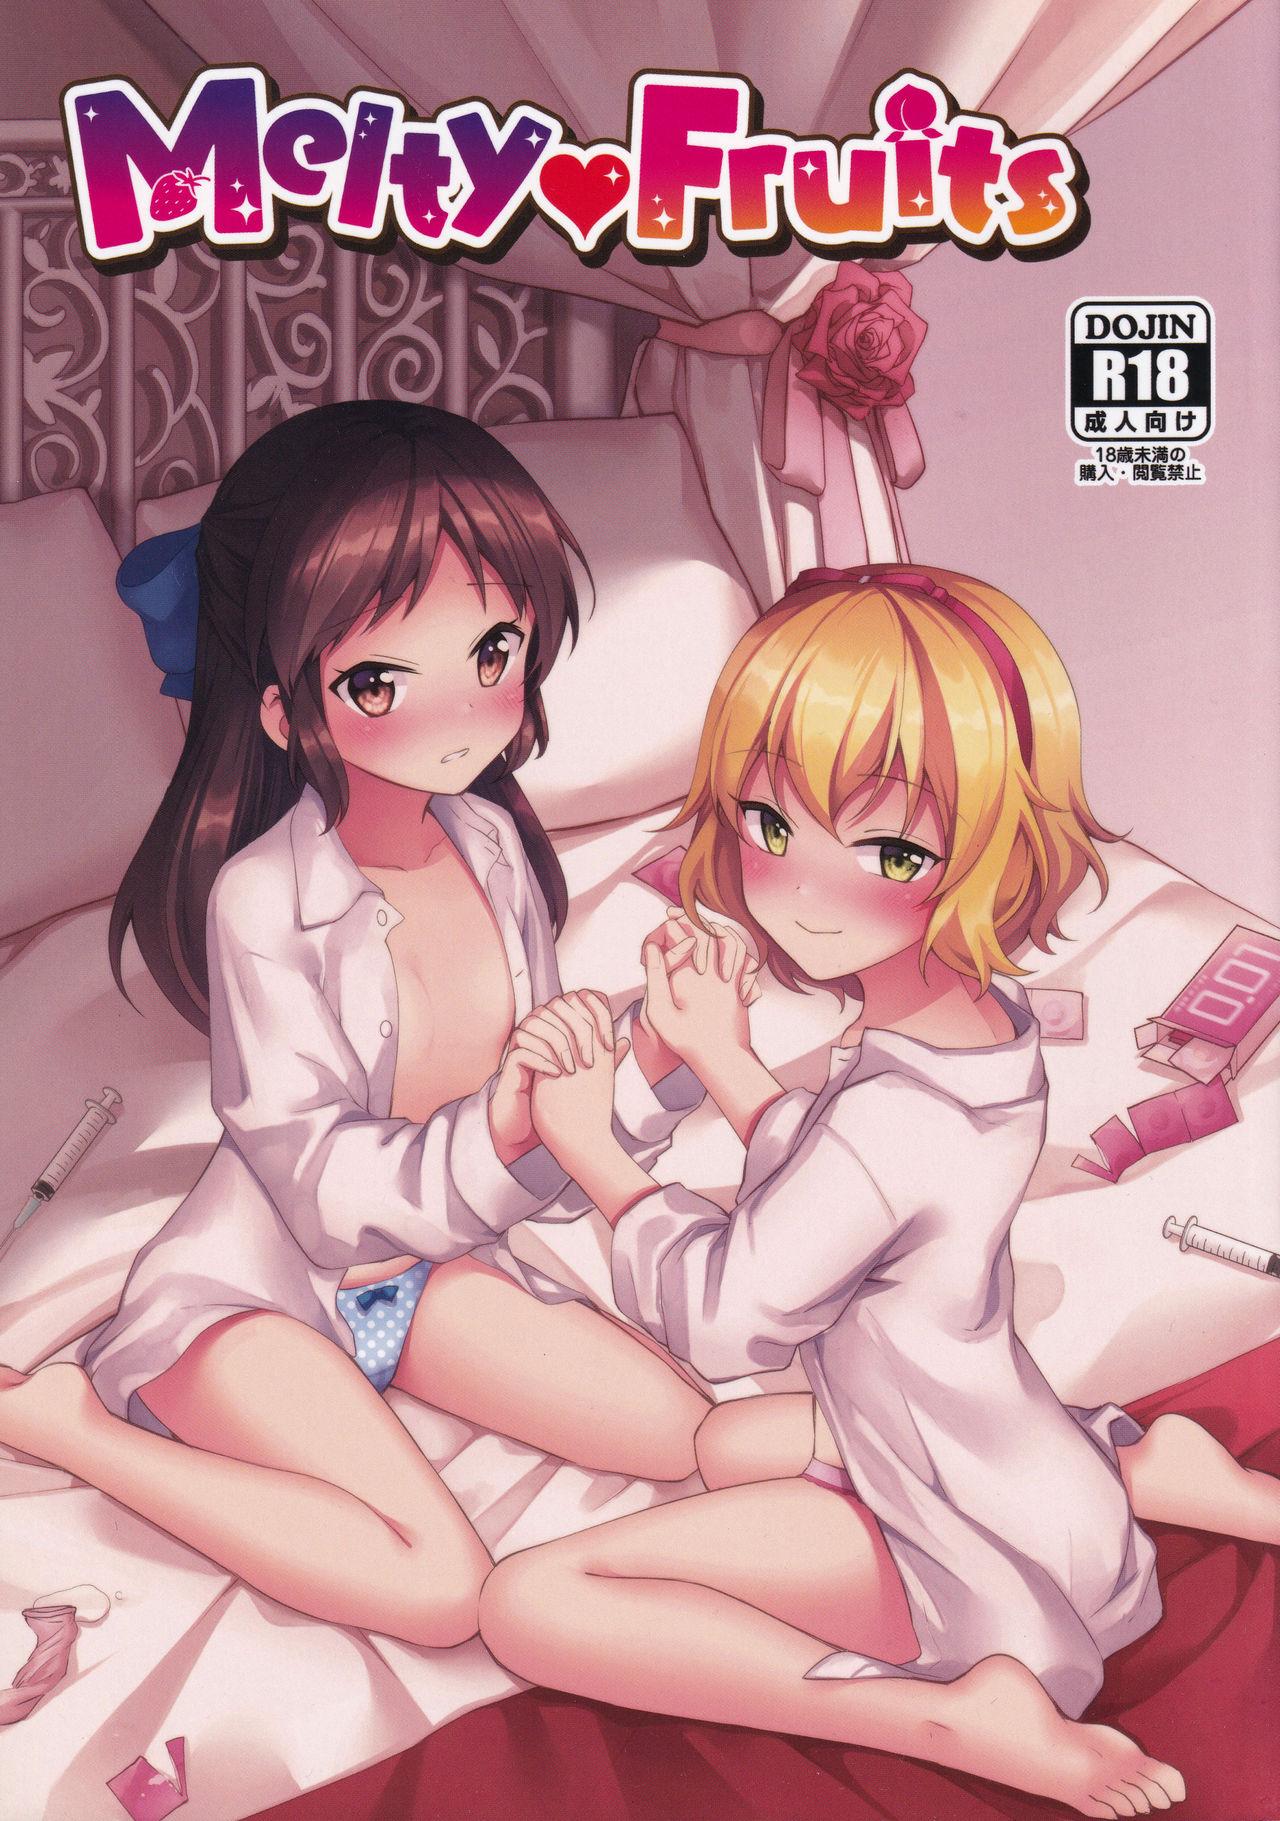 Clothed Sex Melty Fruits - The idolmaster Hd Porn - Page 1